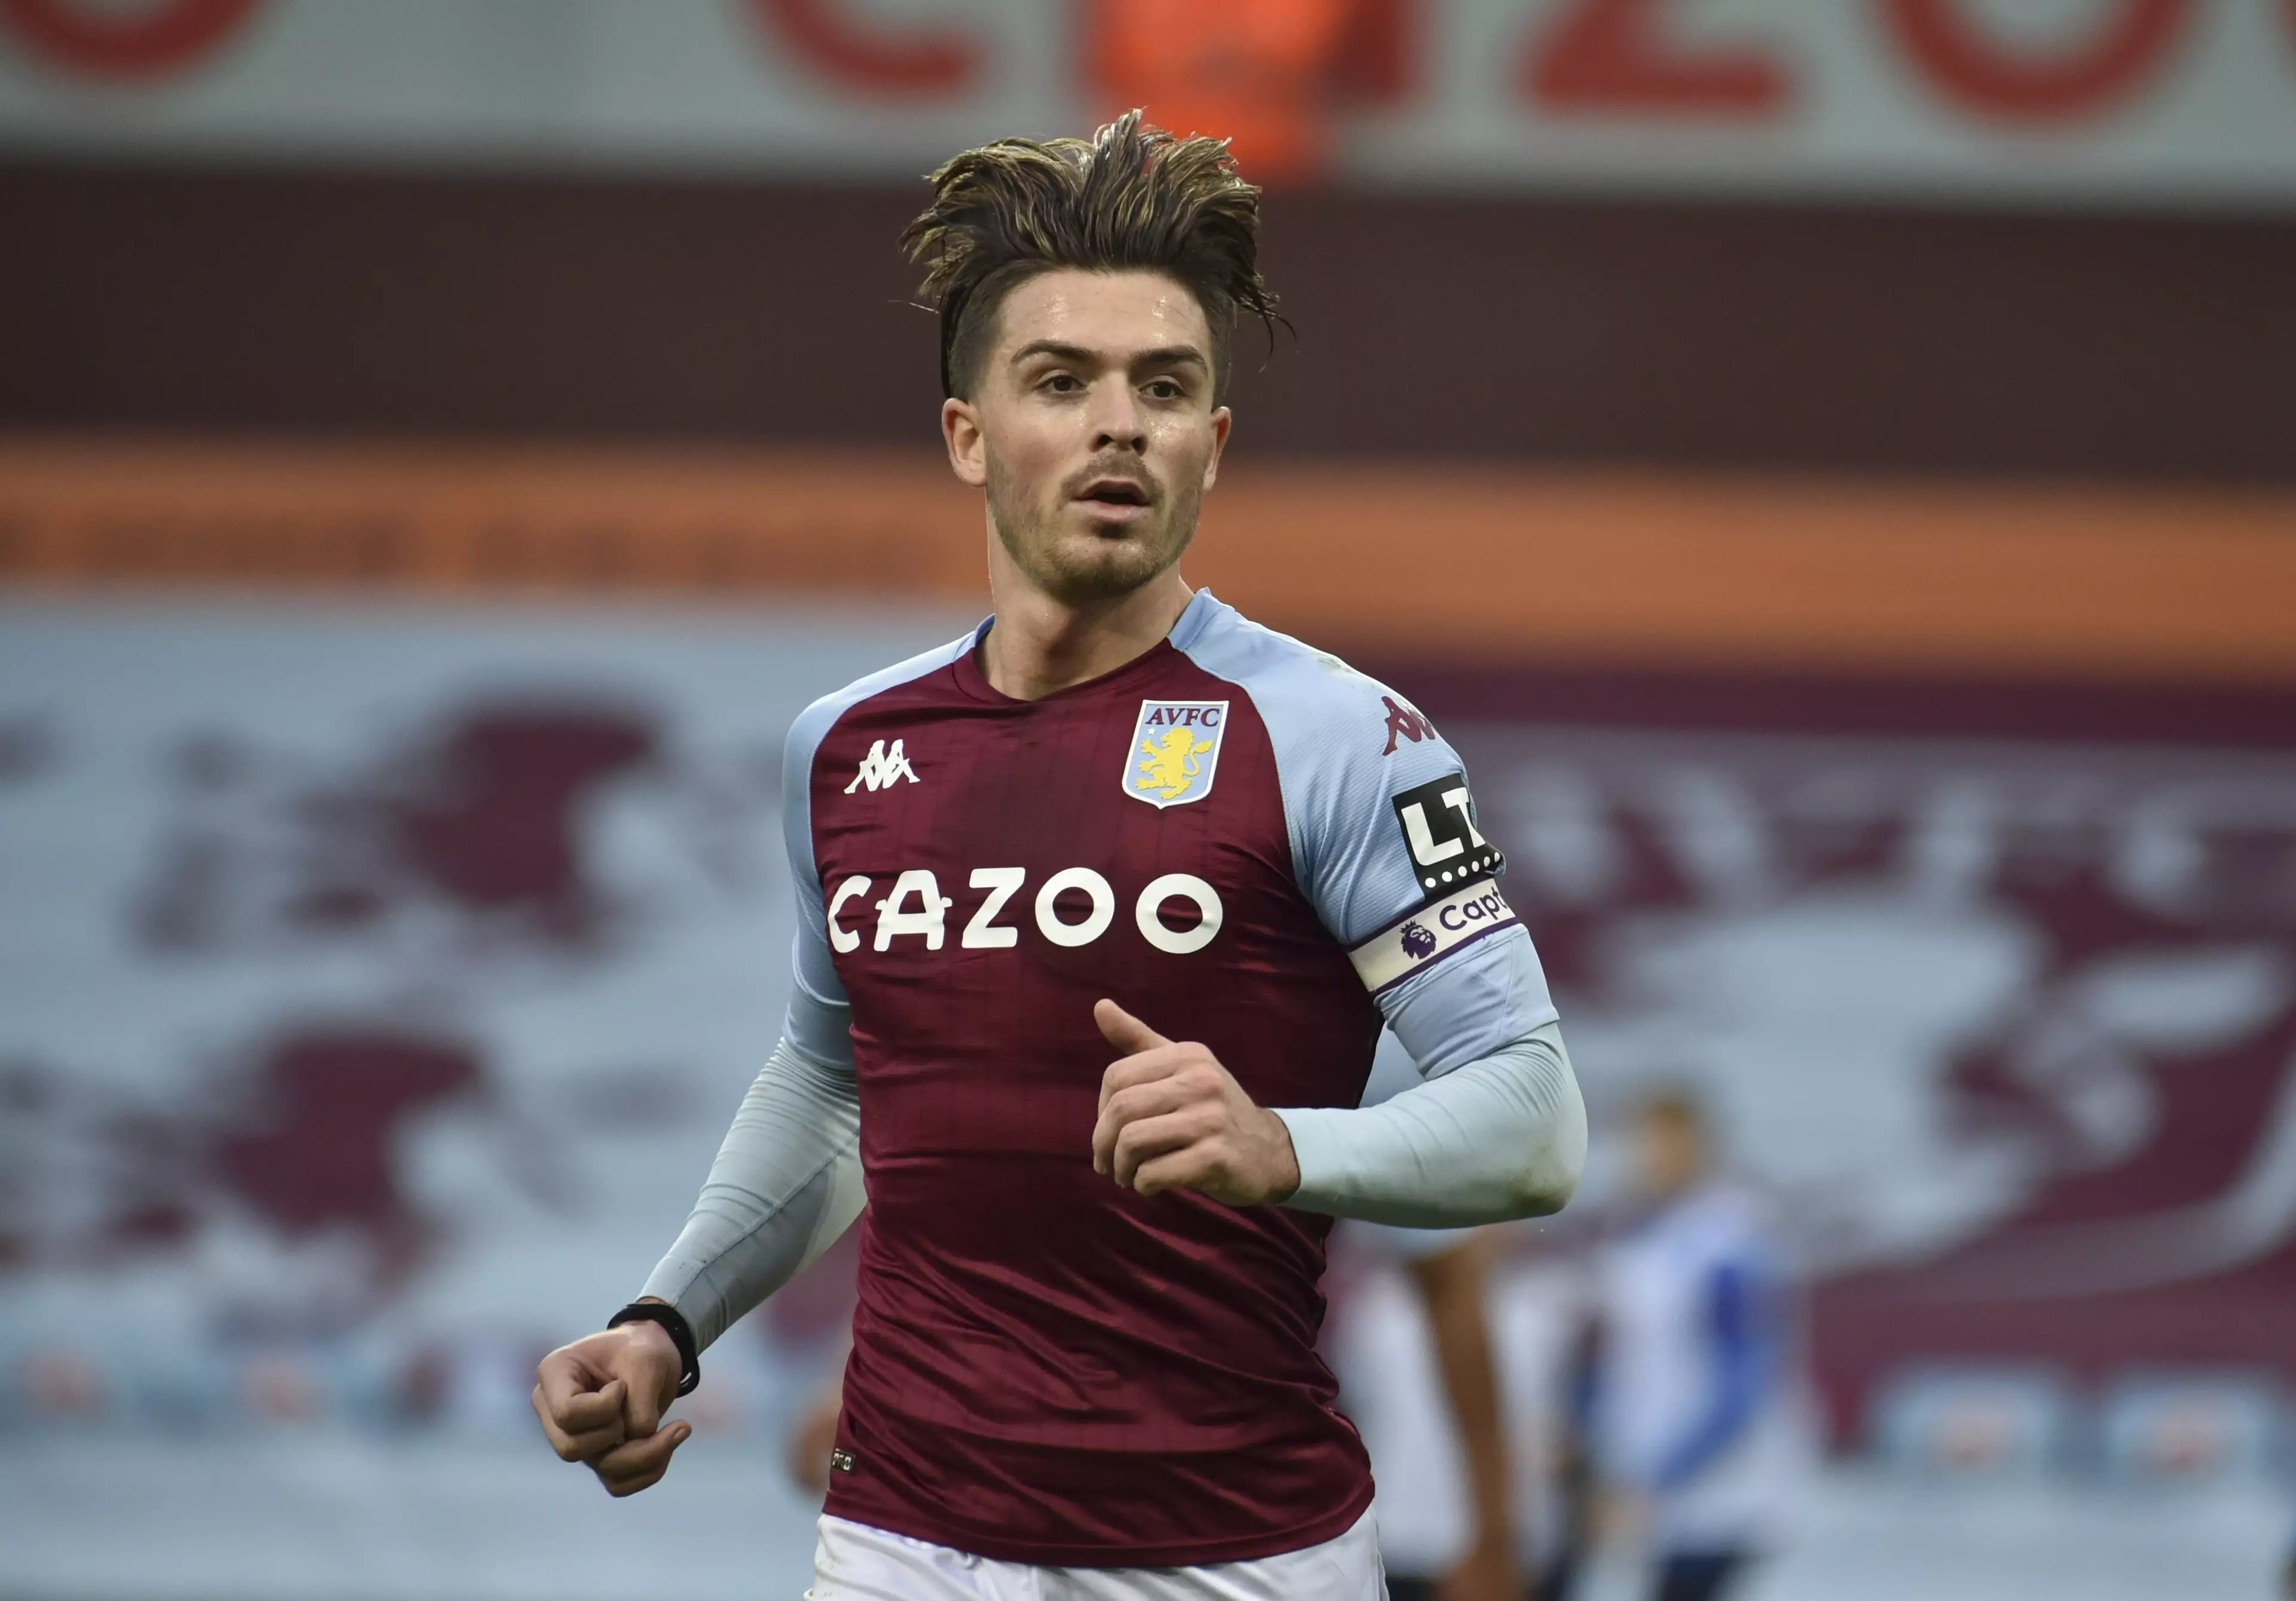 Grealish has been in excellent form for Villa and England this season. Image: PA Images